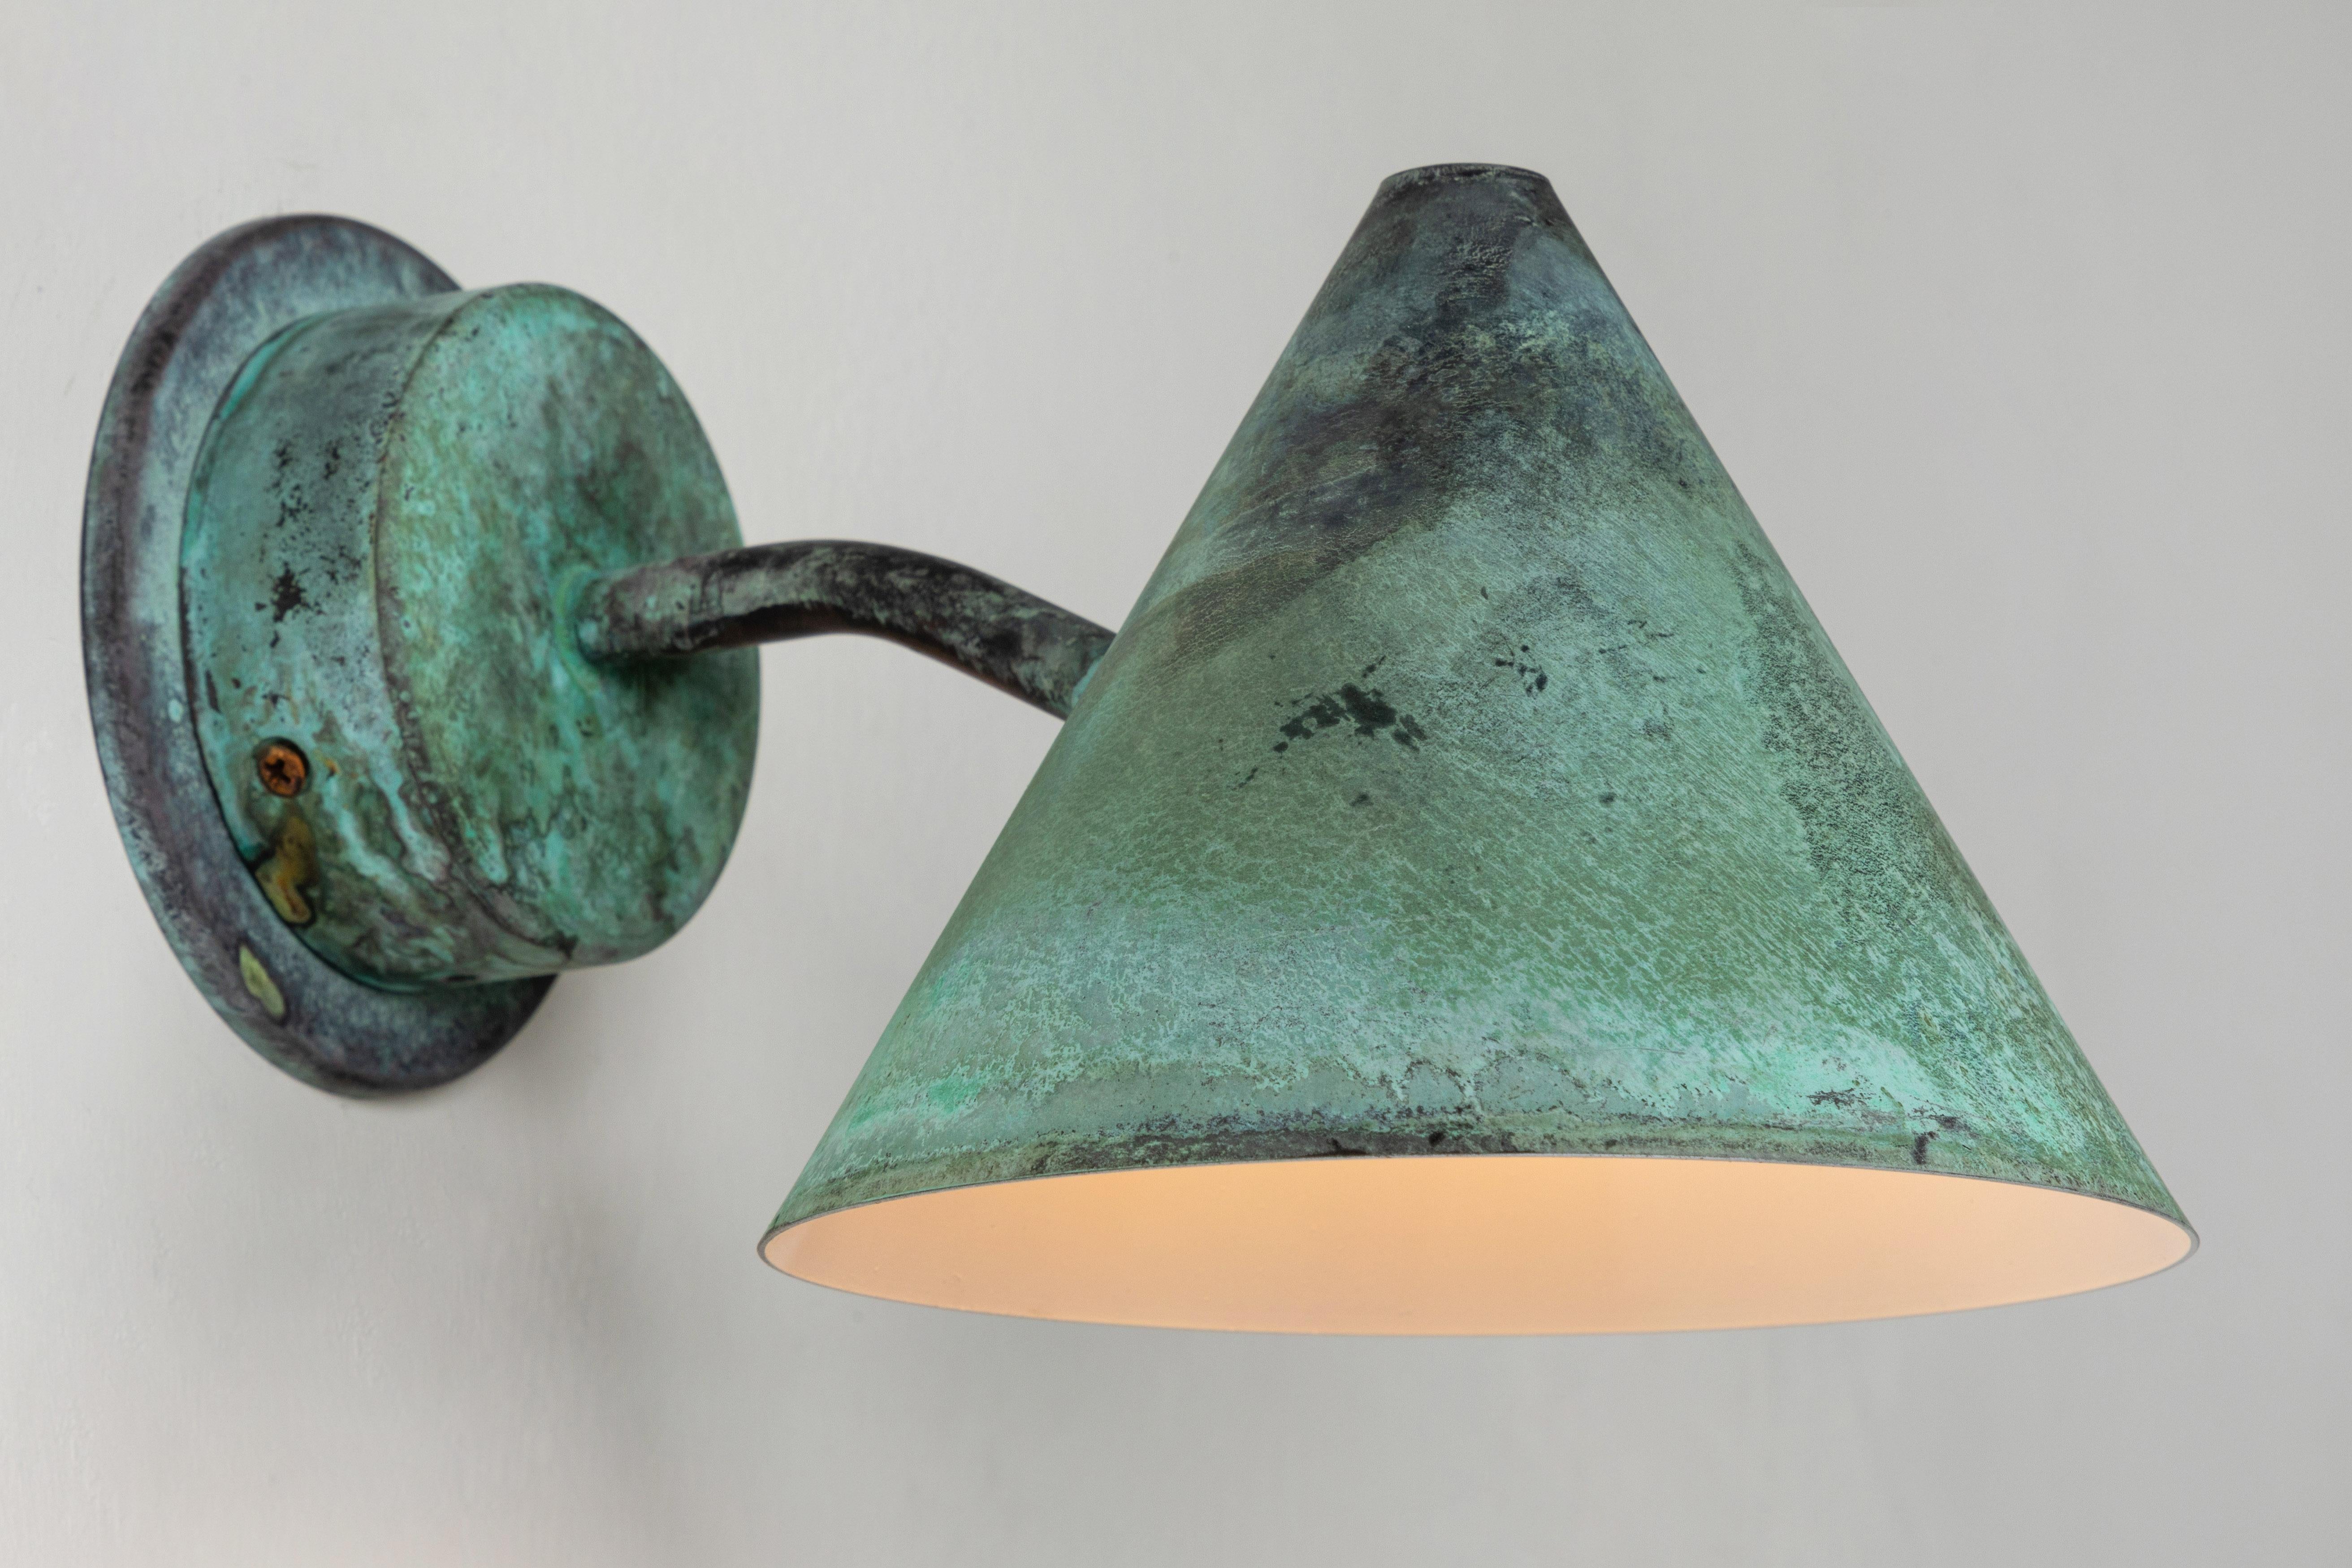 Hans-Agne Jakobsson 'Mini-Tratten' verdigris patinated outdoor sconce. A smaller scale version of the Classic Swedish outdoor wall lamp executed in rich verdigris patinated metal with white painted interior. An incredibly refined design that is